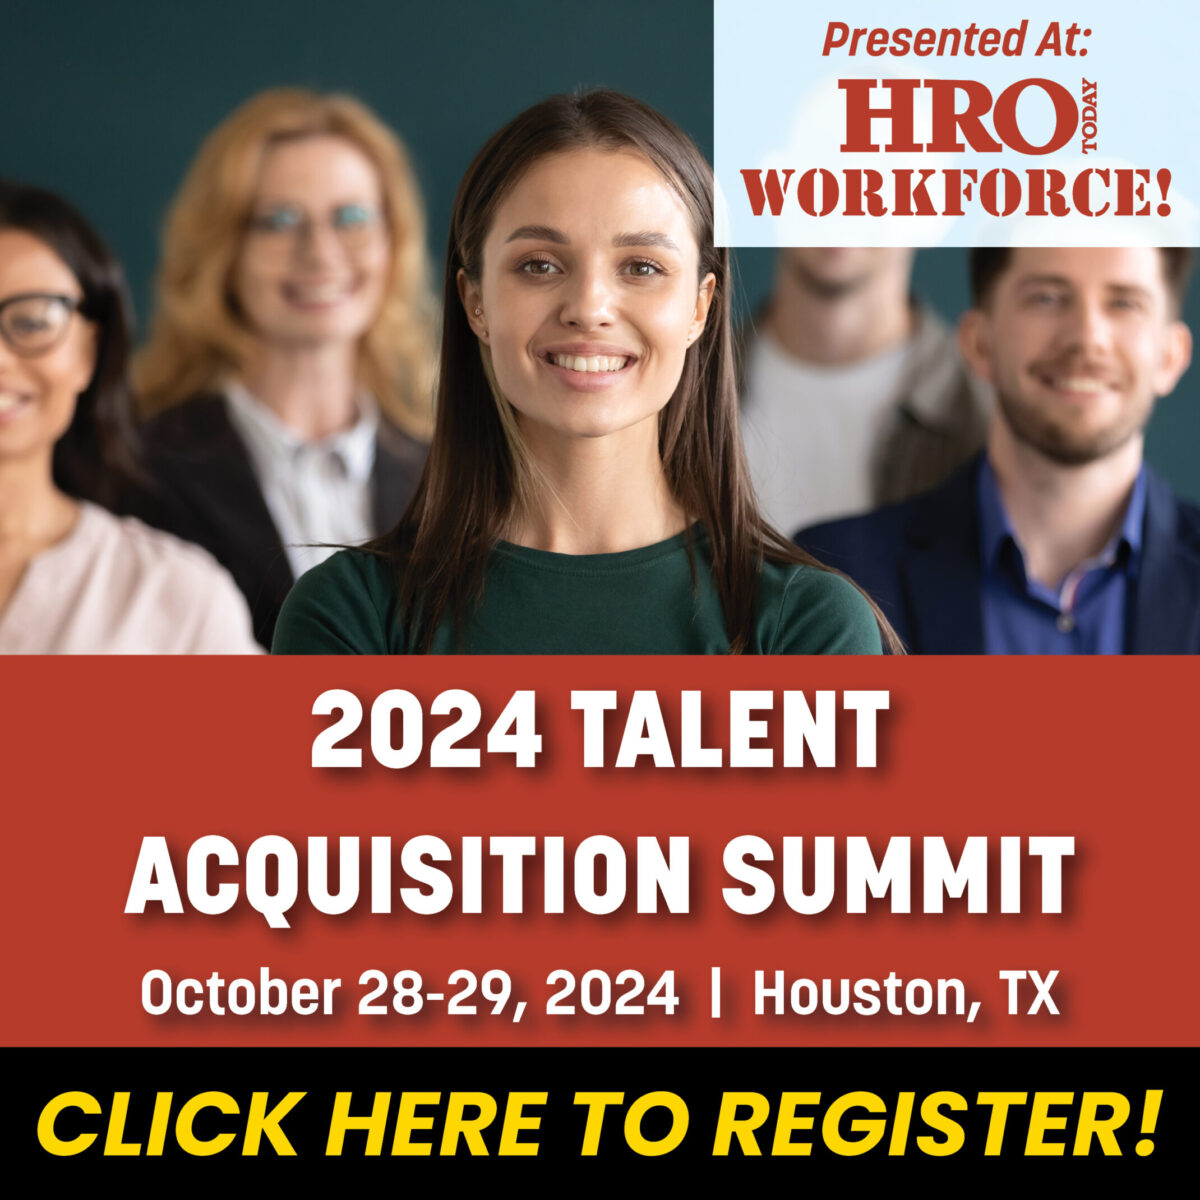 Register for the 2024 Talent Acquisition Summit